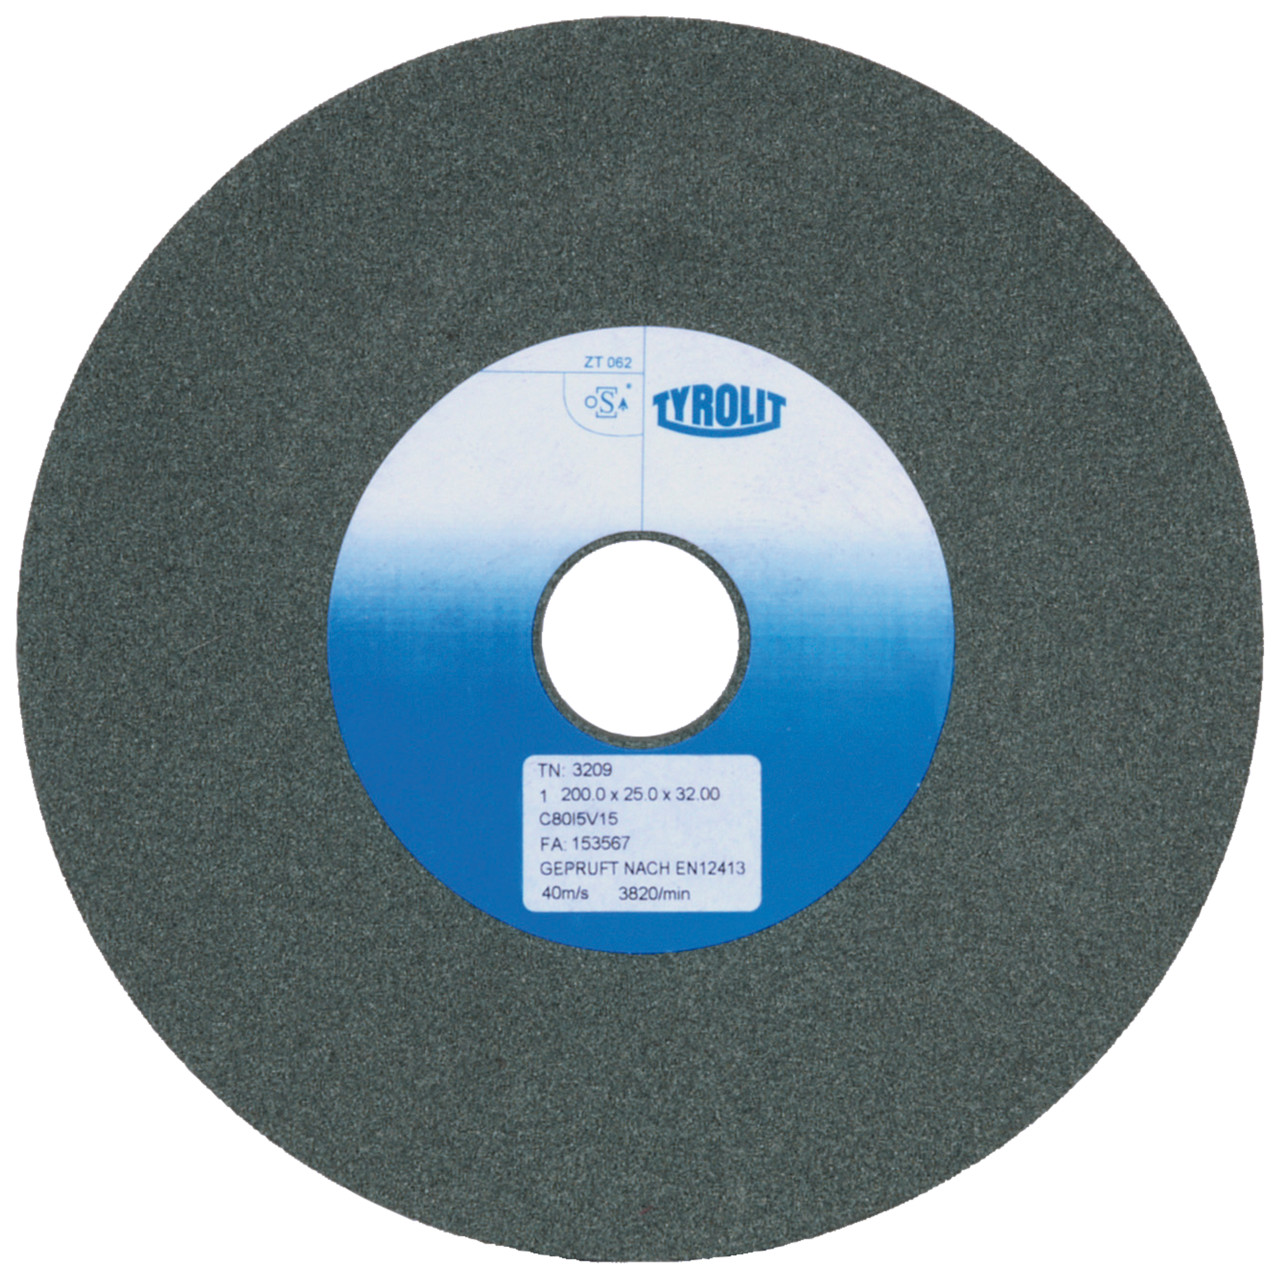 TYROLIT conventional ceramic grinding wheels DxDxH 150x13x25 For carbide and cast iron, shape: 1, Art. 664185